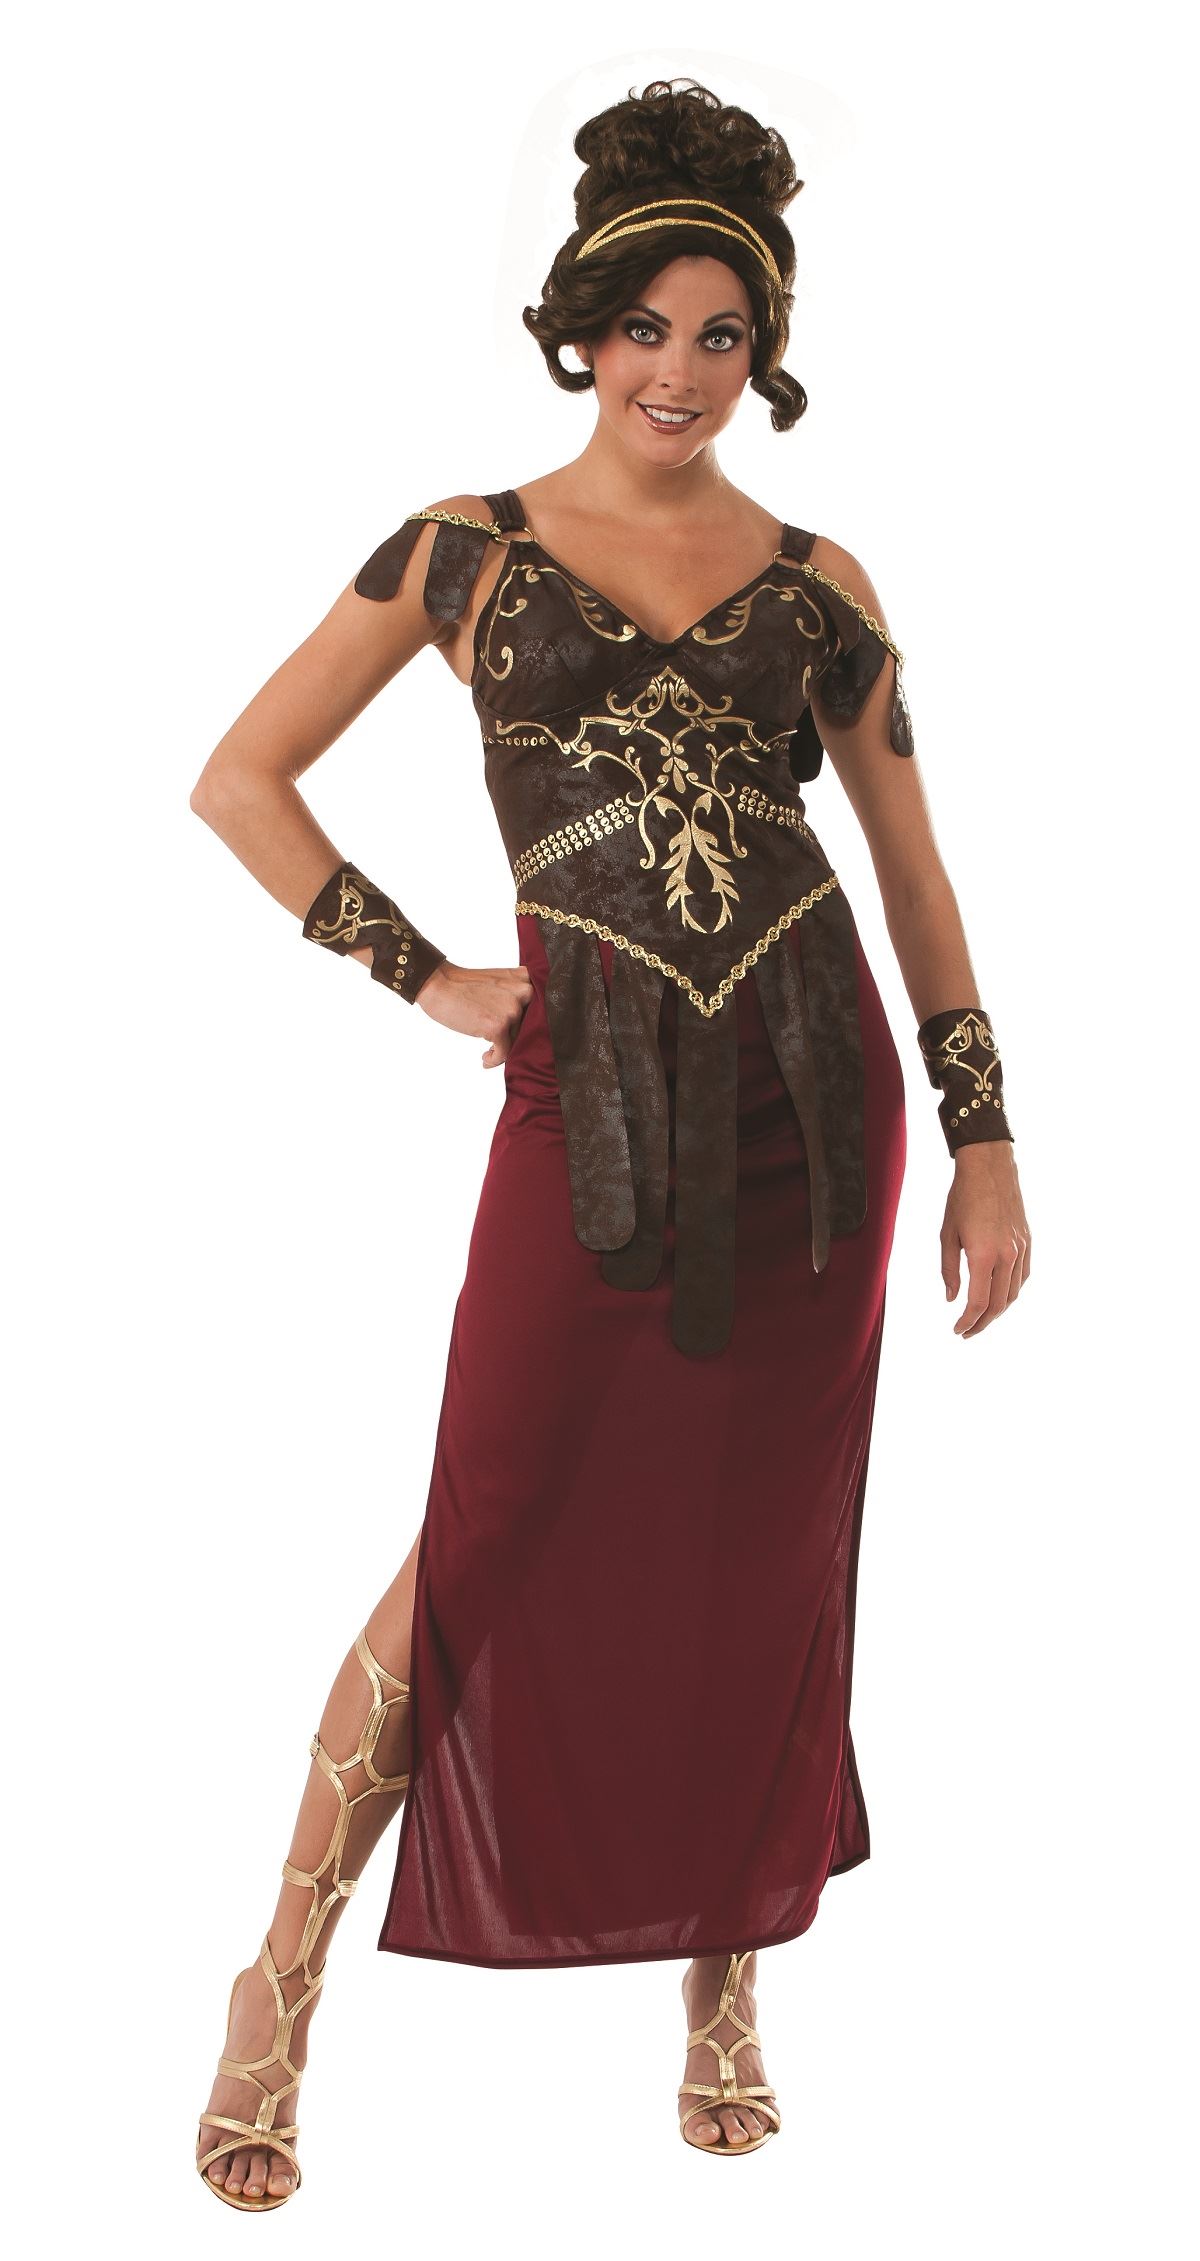 Adult Medieval Warrior Women Costume | $36.65 | The Costume Land1200 x 2261